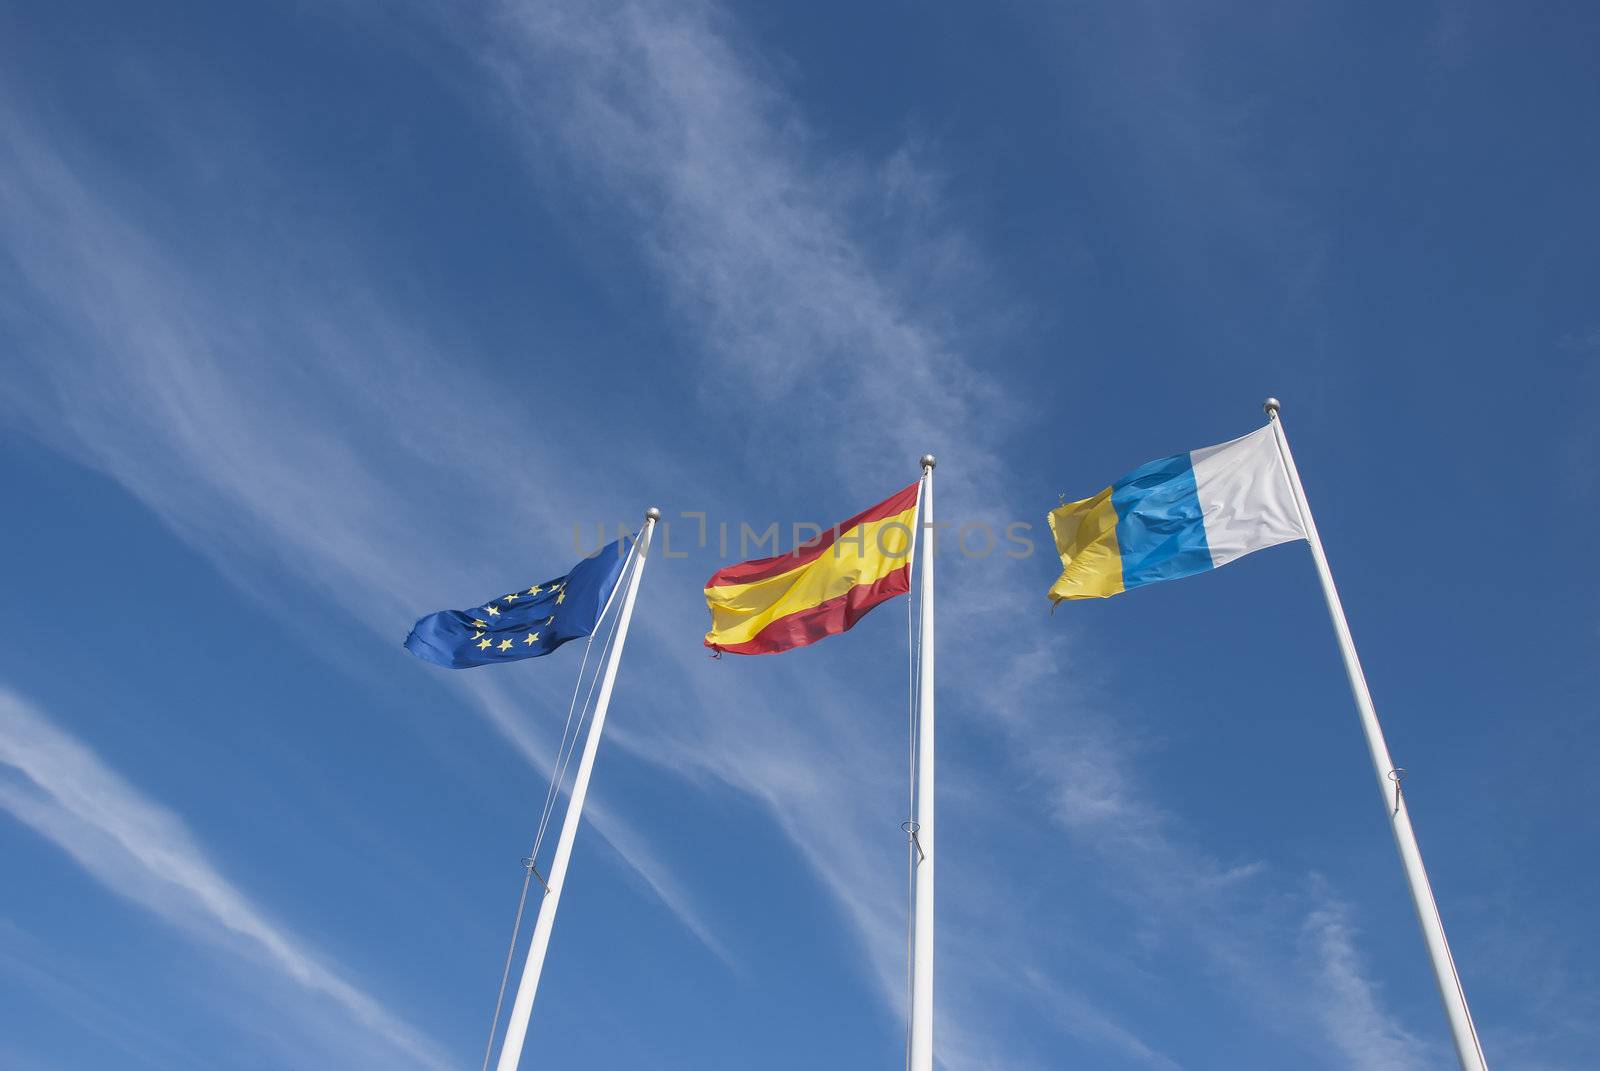 Canary Island Flags by d40xboy